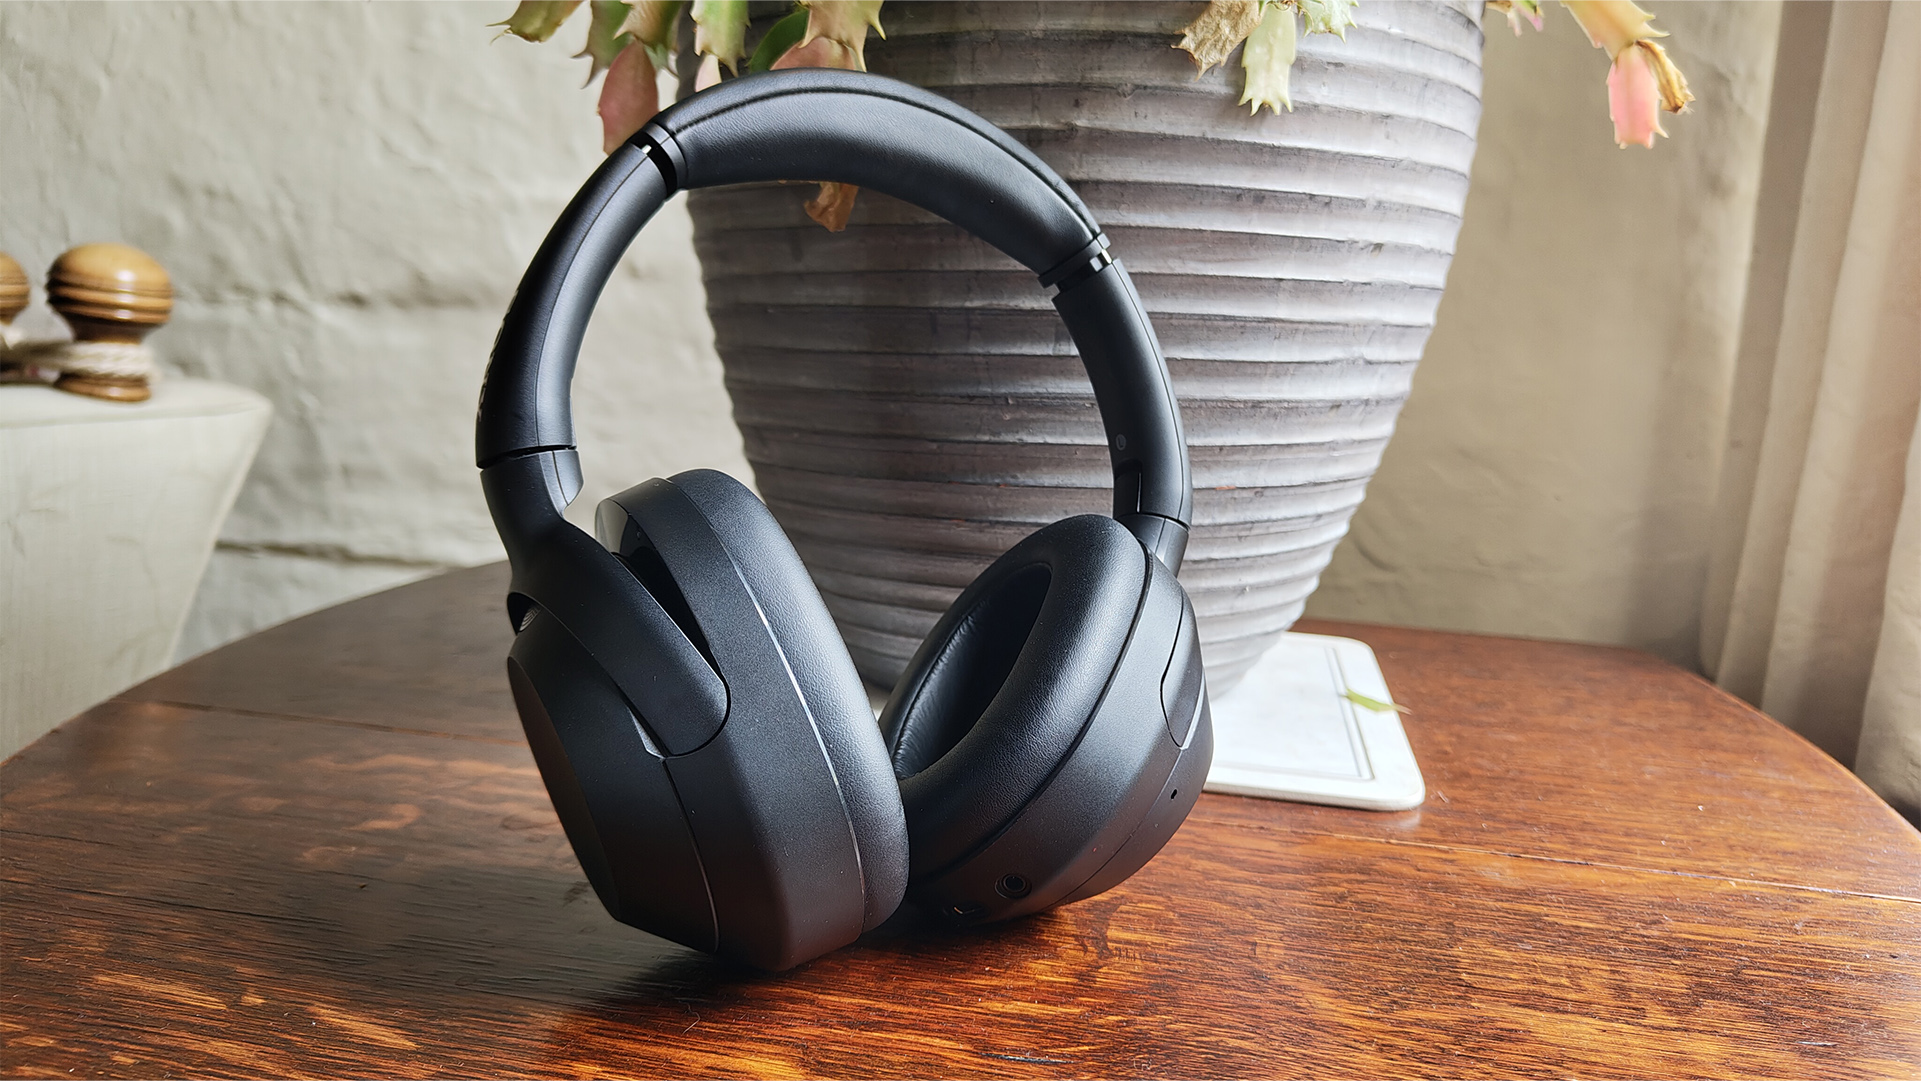 Sony ULT Wear over-ear headphones leaning up against plant pot on wooden table